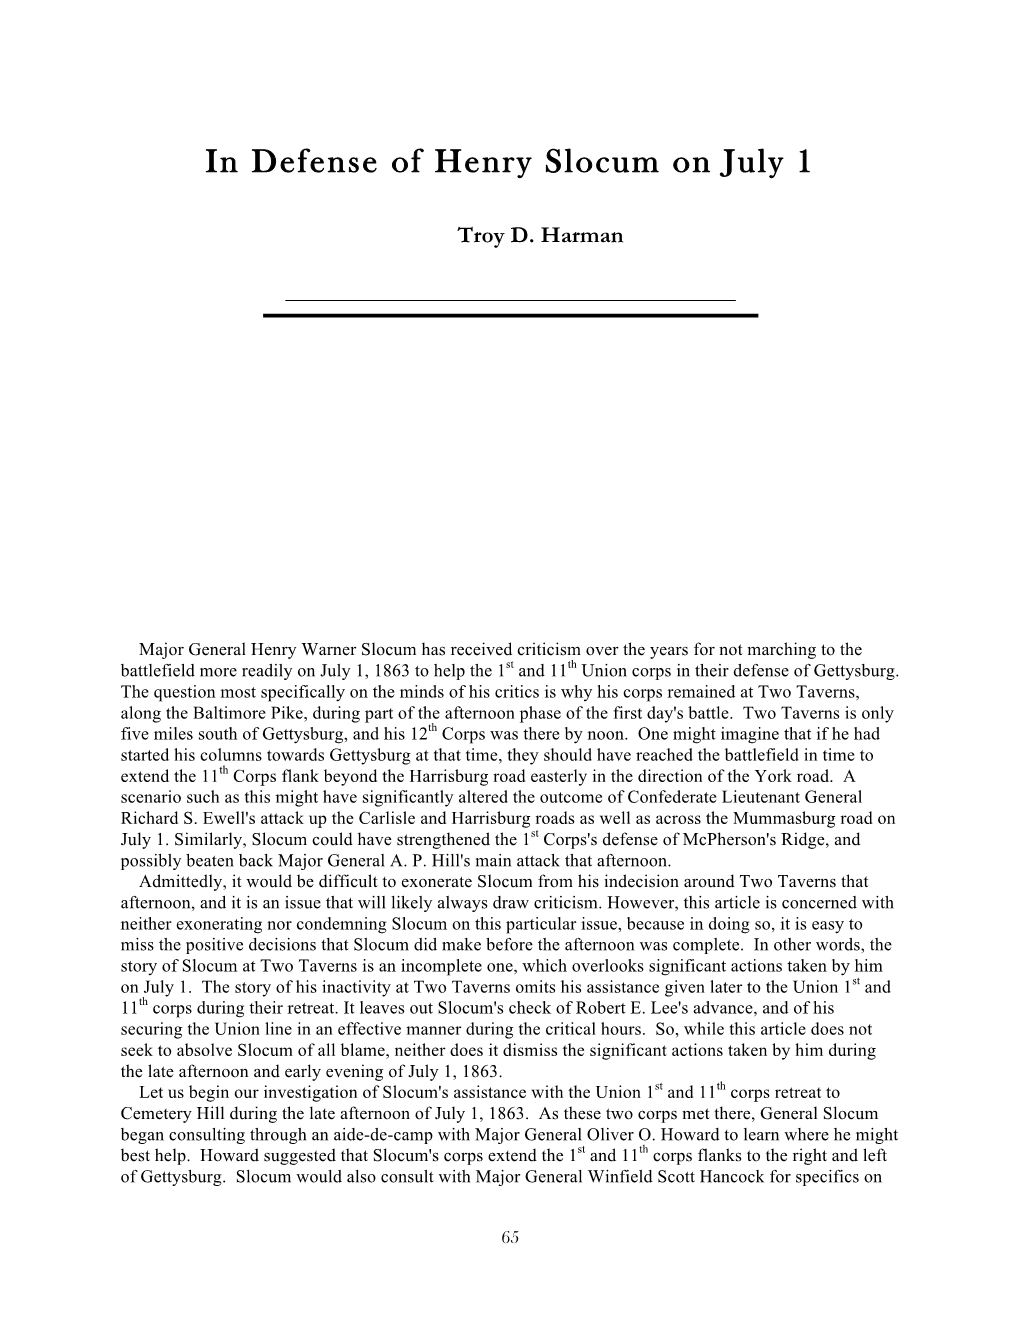 In Defense of Henry Slocum on July 1